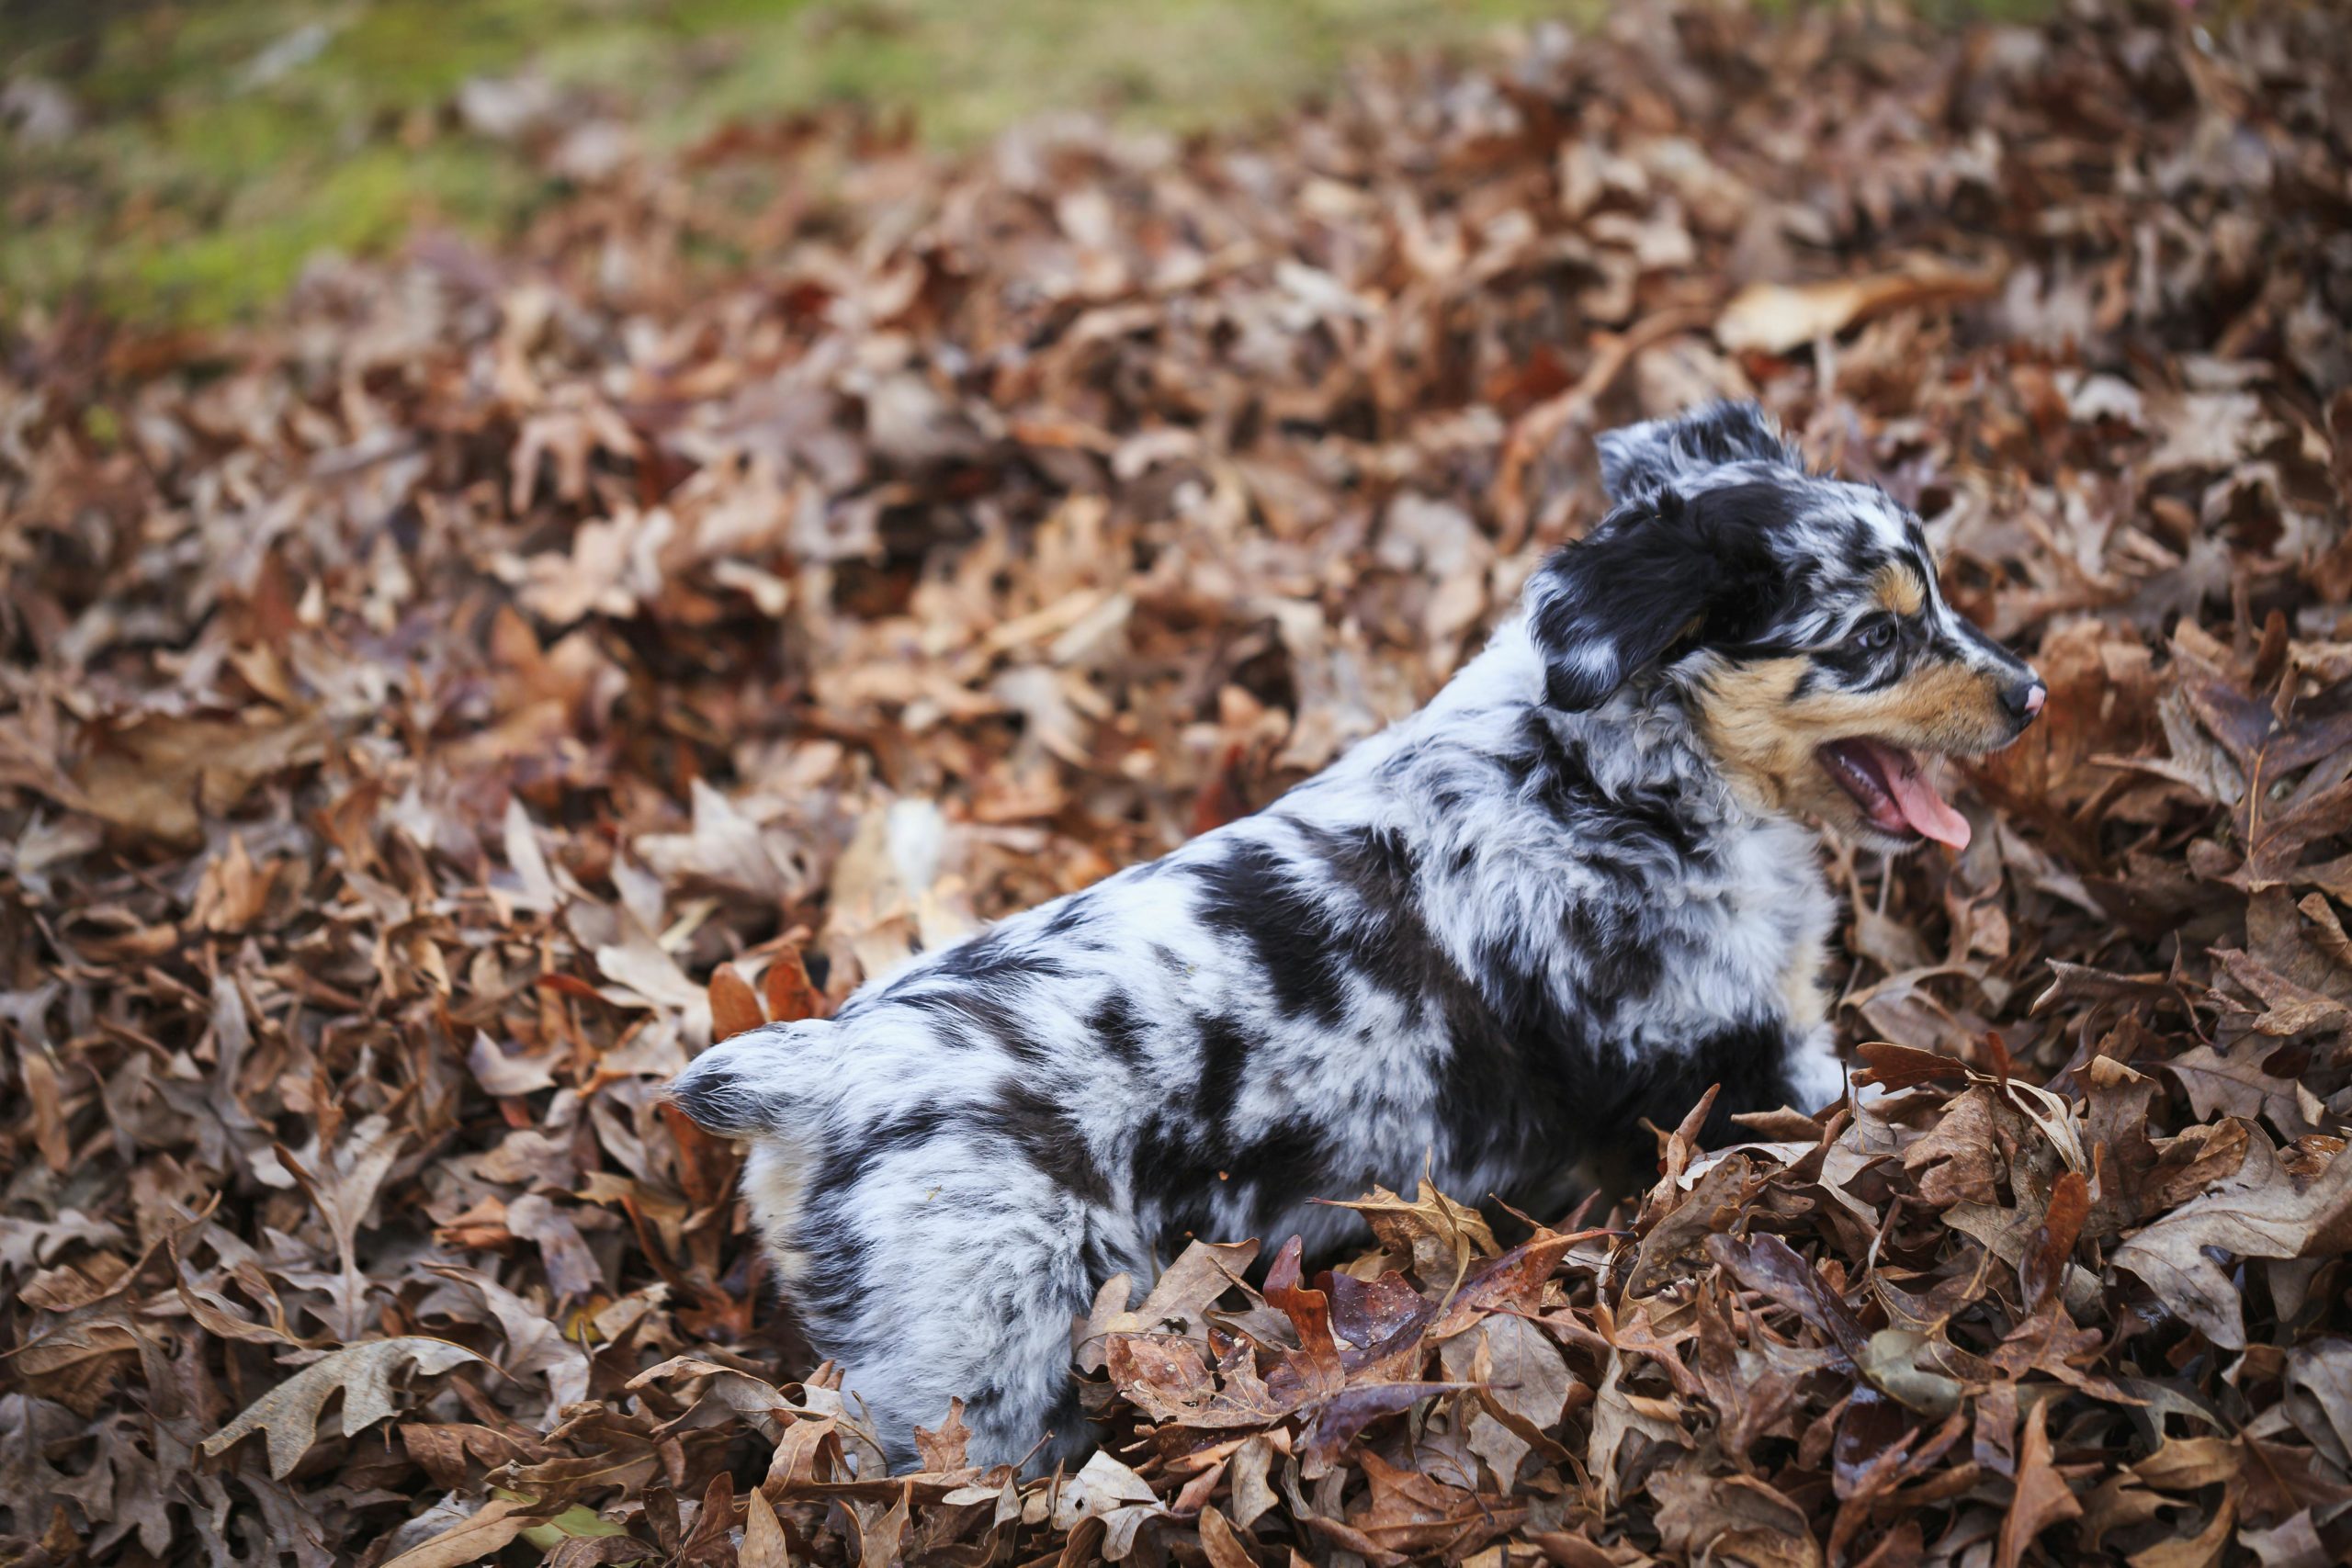 The Australian Shepherd pup enjoying his walk through the forest playing in a pile of leaves